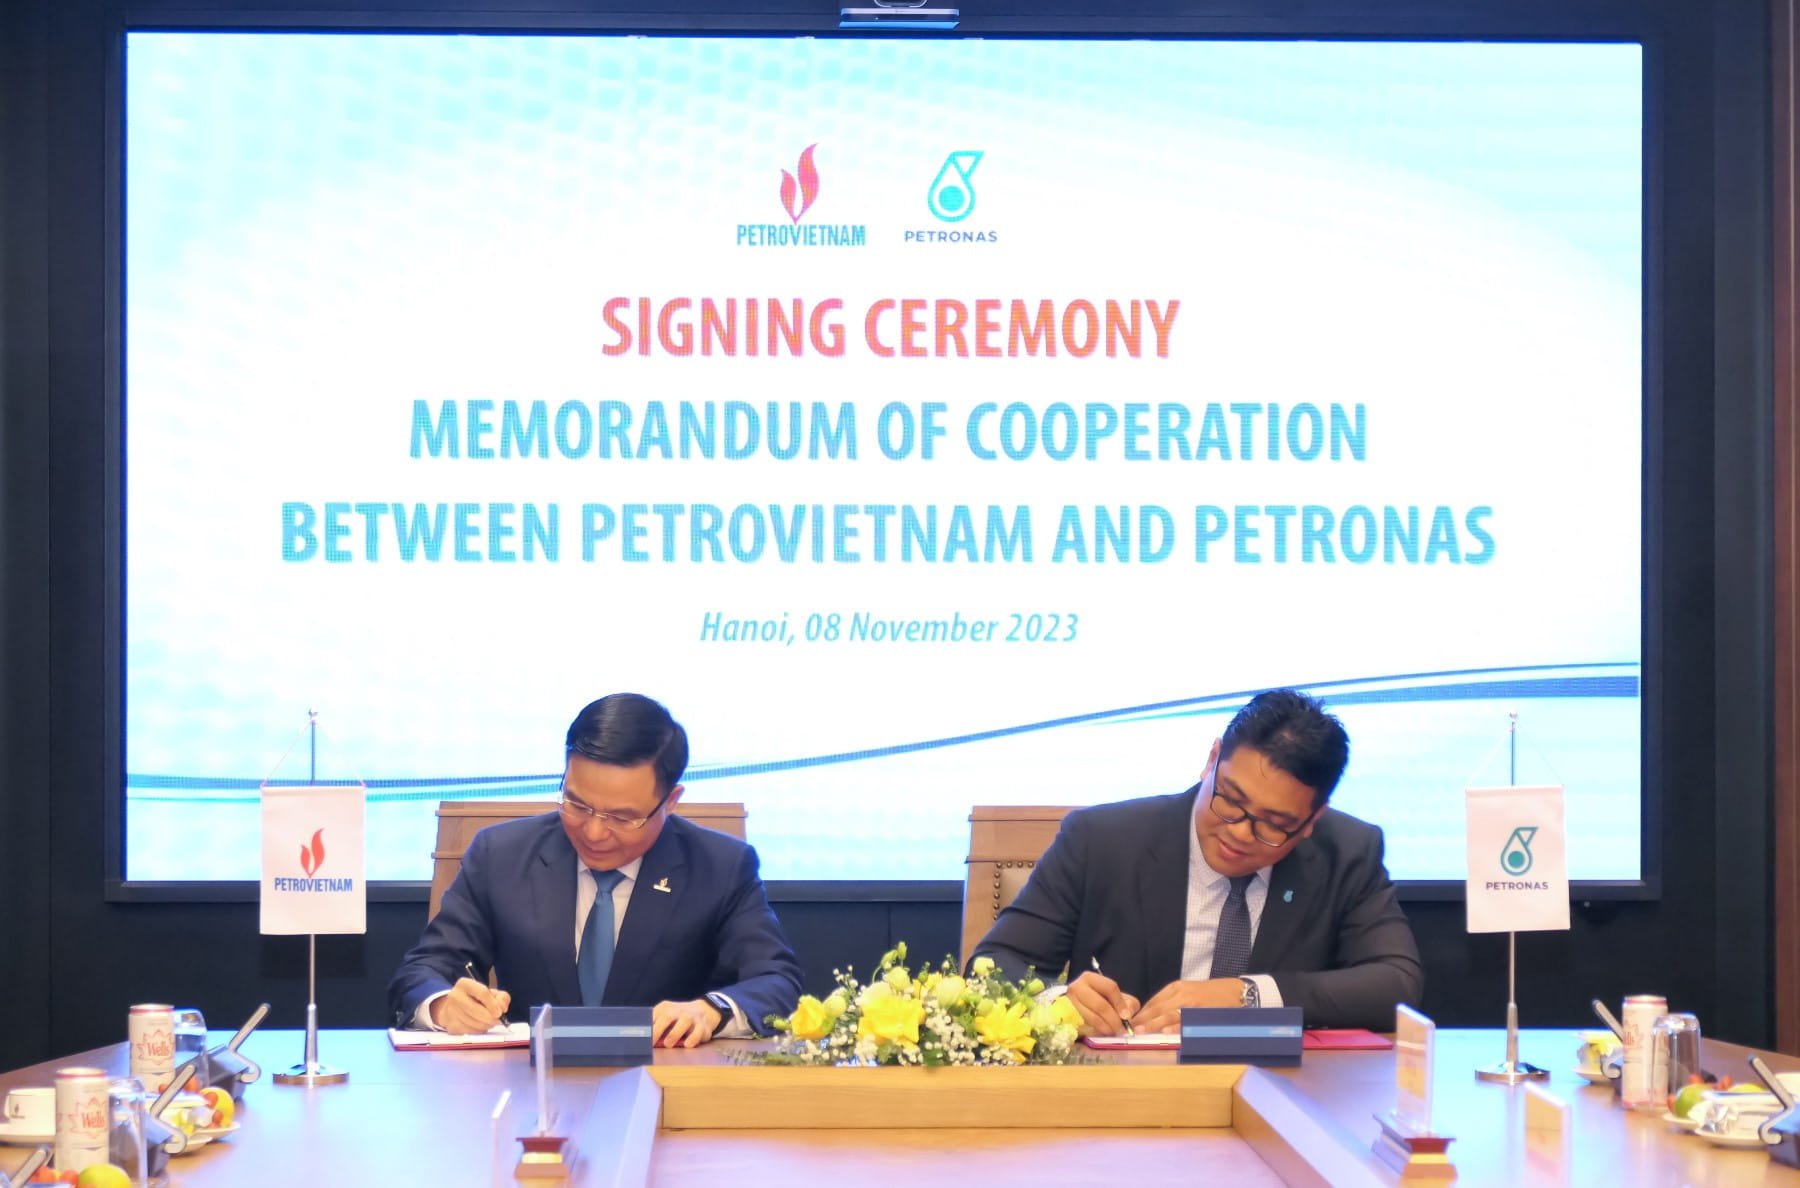 Petronas' President and Group CEO, Tan Sri Tengku Muhammad Taufik (right) and PetroVietnam President and CEO, Dr Le Manh Hung (left) at the memorandum of cooperation signing ceremony in Hanoi; Source: Petronas